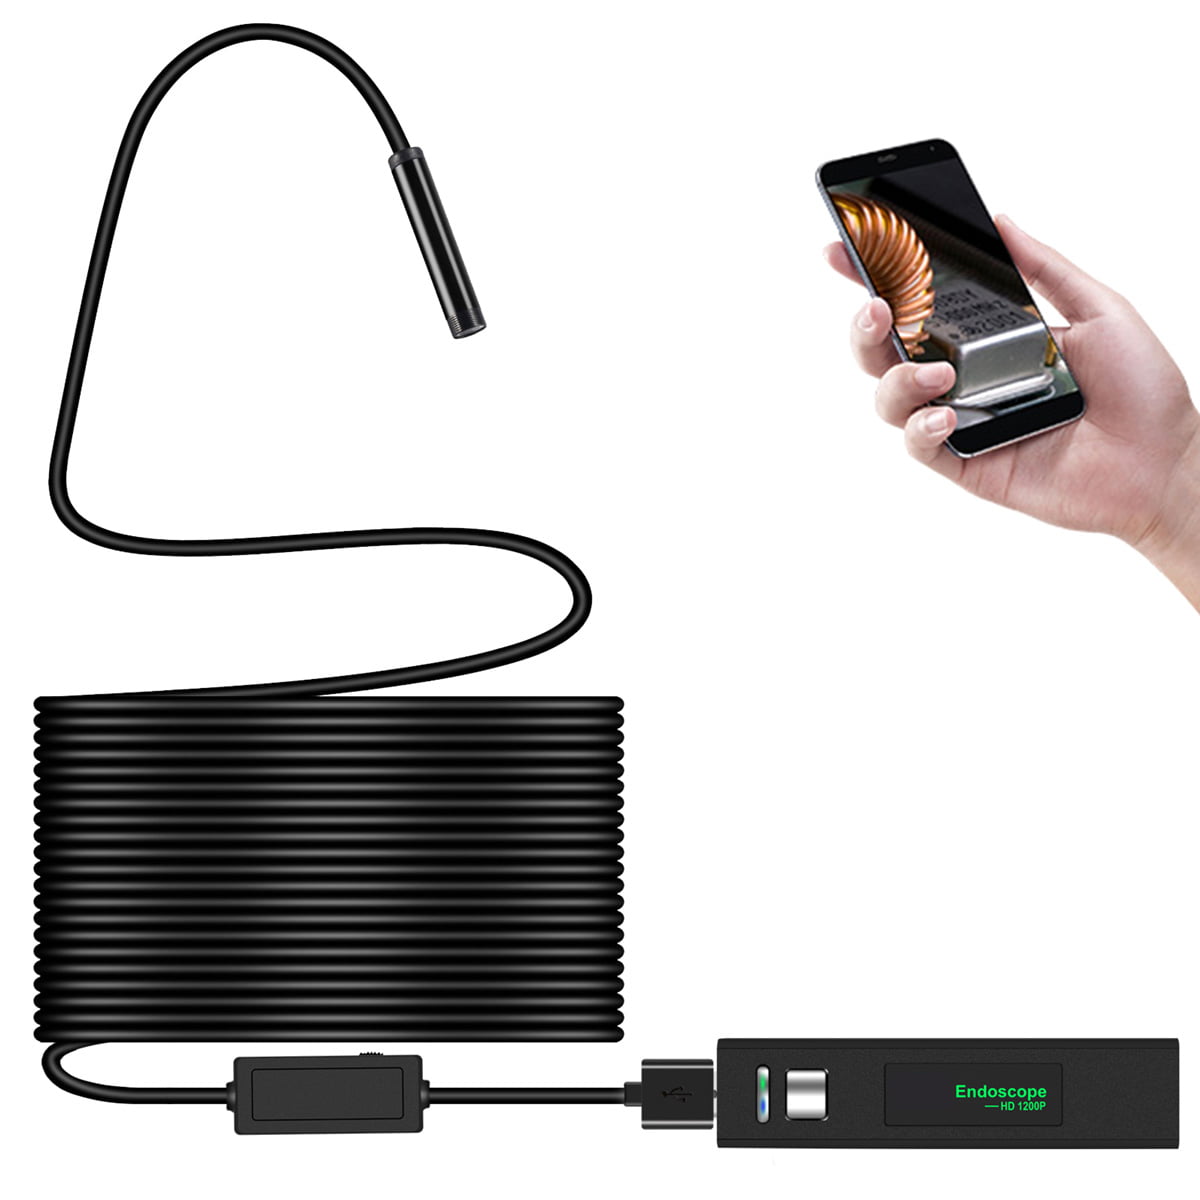 Endoscope Wireless WiFi LED IP68 Borescope Inspection Camera for iPhone Android 